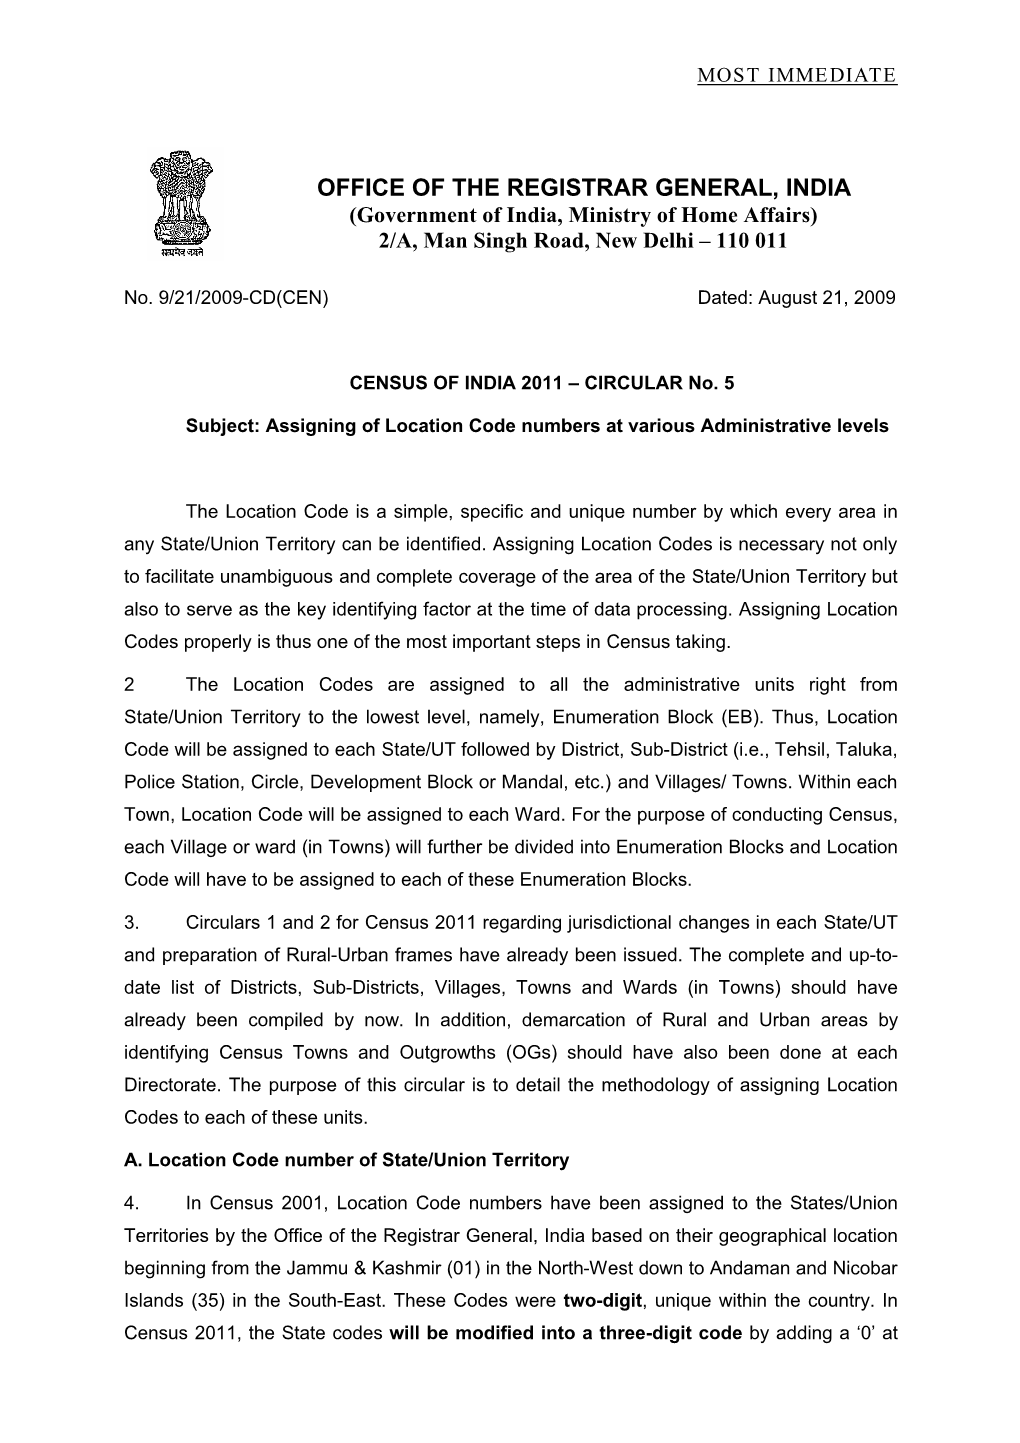 OFFICE of the REGISTRAR GENERAL, INDIA (Government of India, Ministry of Home Affairs) 2/A, Man Singh Road, New Delhi – 110 011